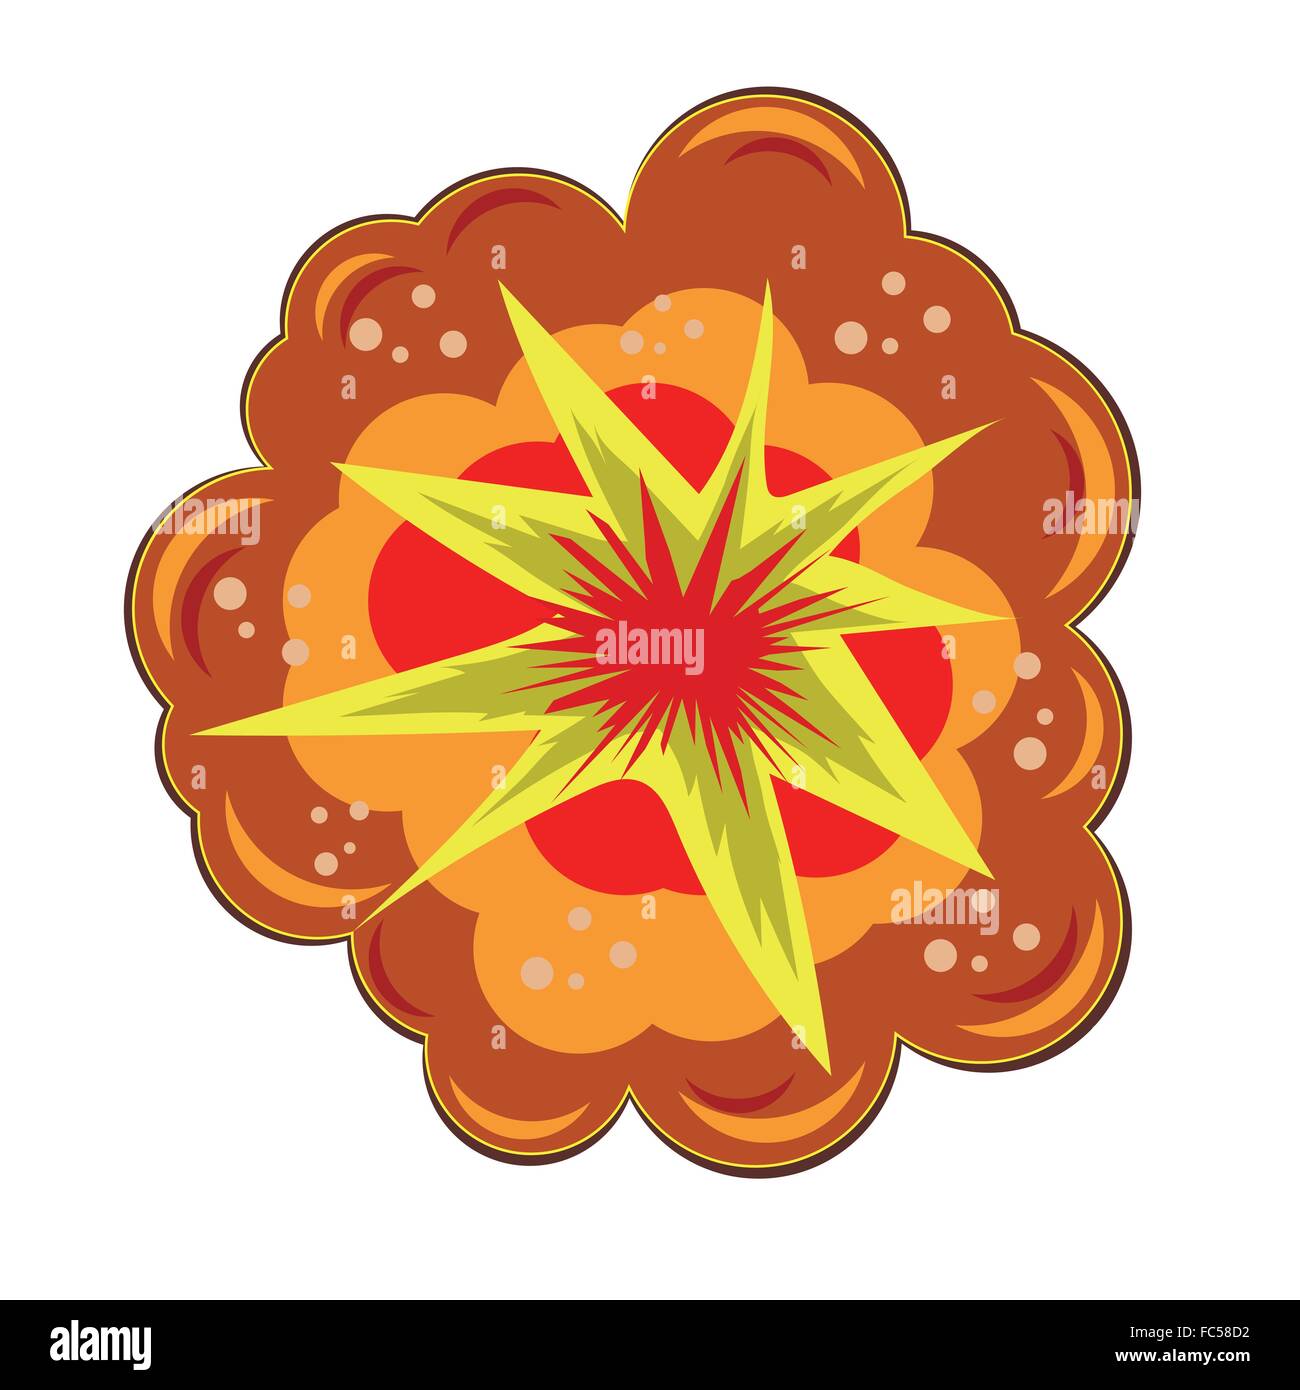 Star Explosion with Particles Stock Vector